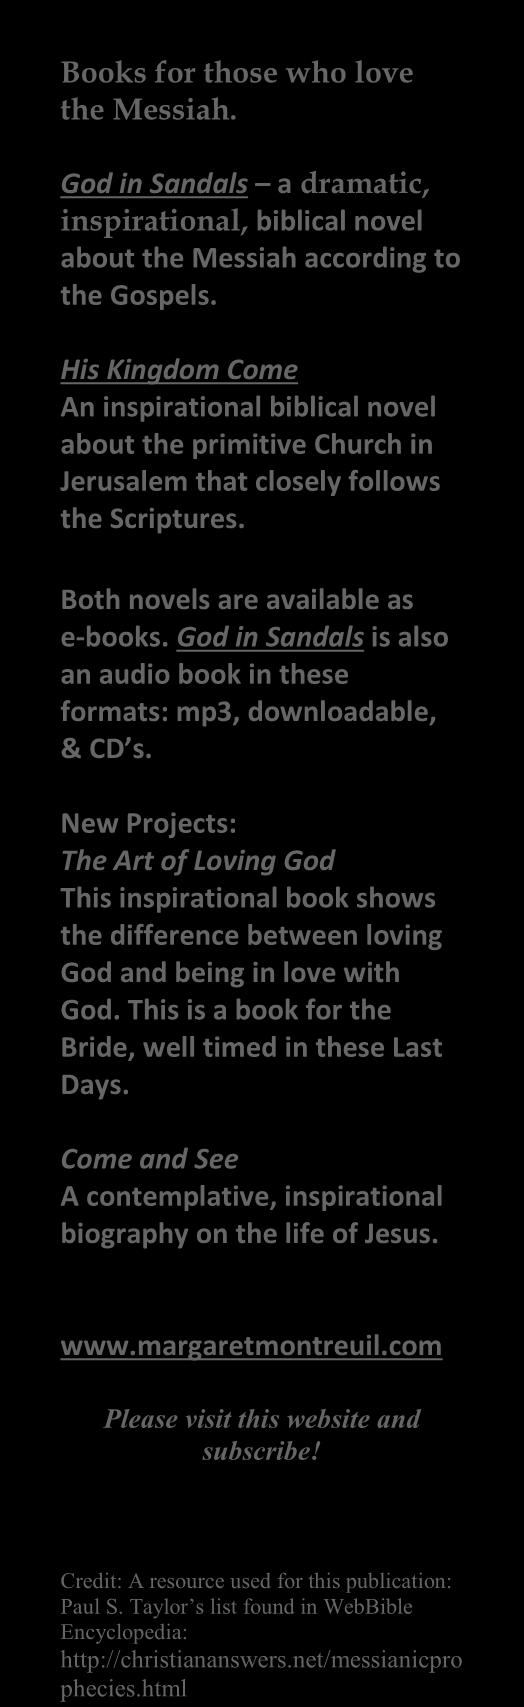 God in Sandals is also an audio book in these formats: mp3, downloadable, & CD s.